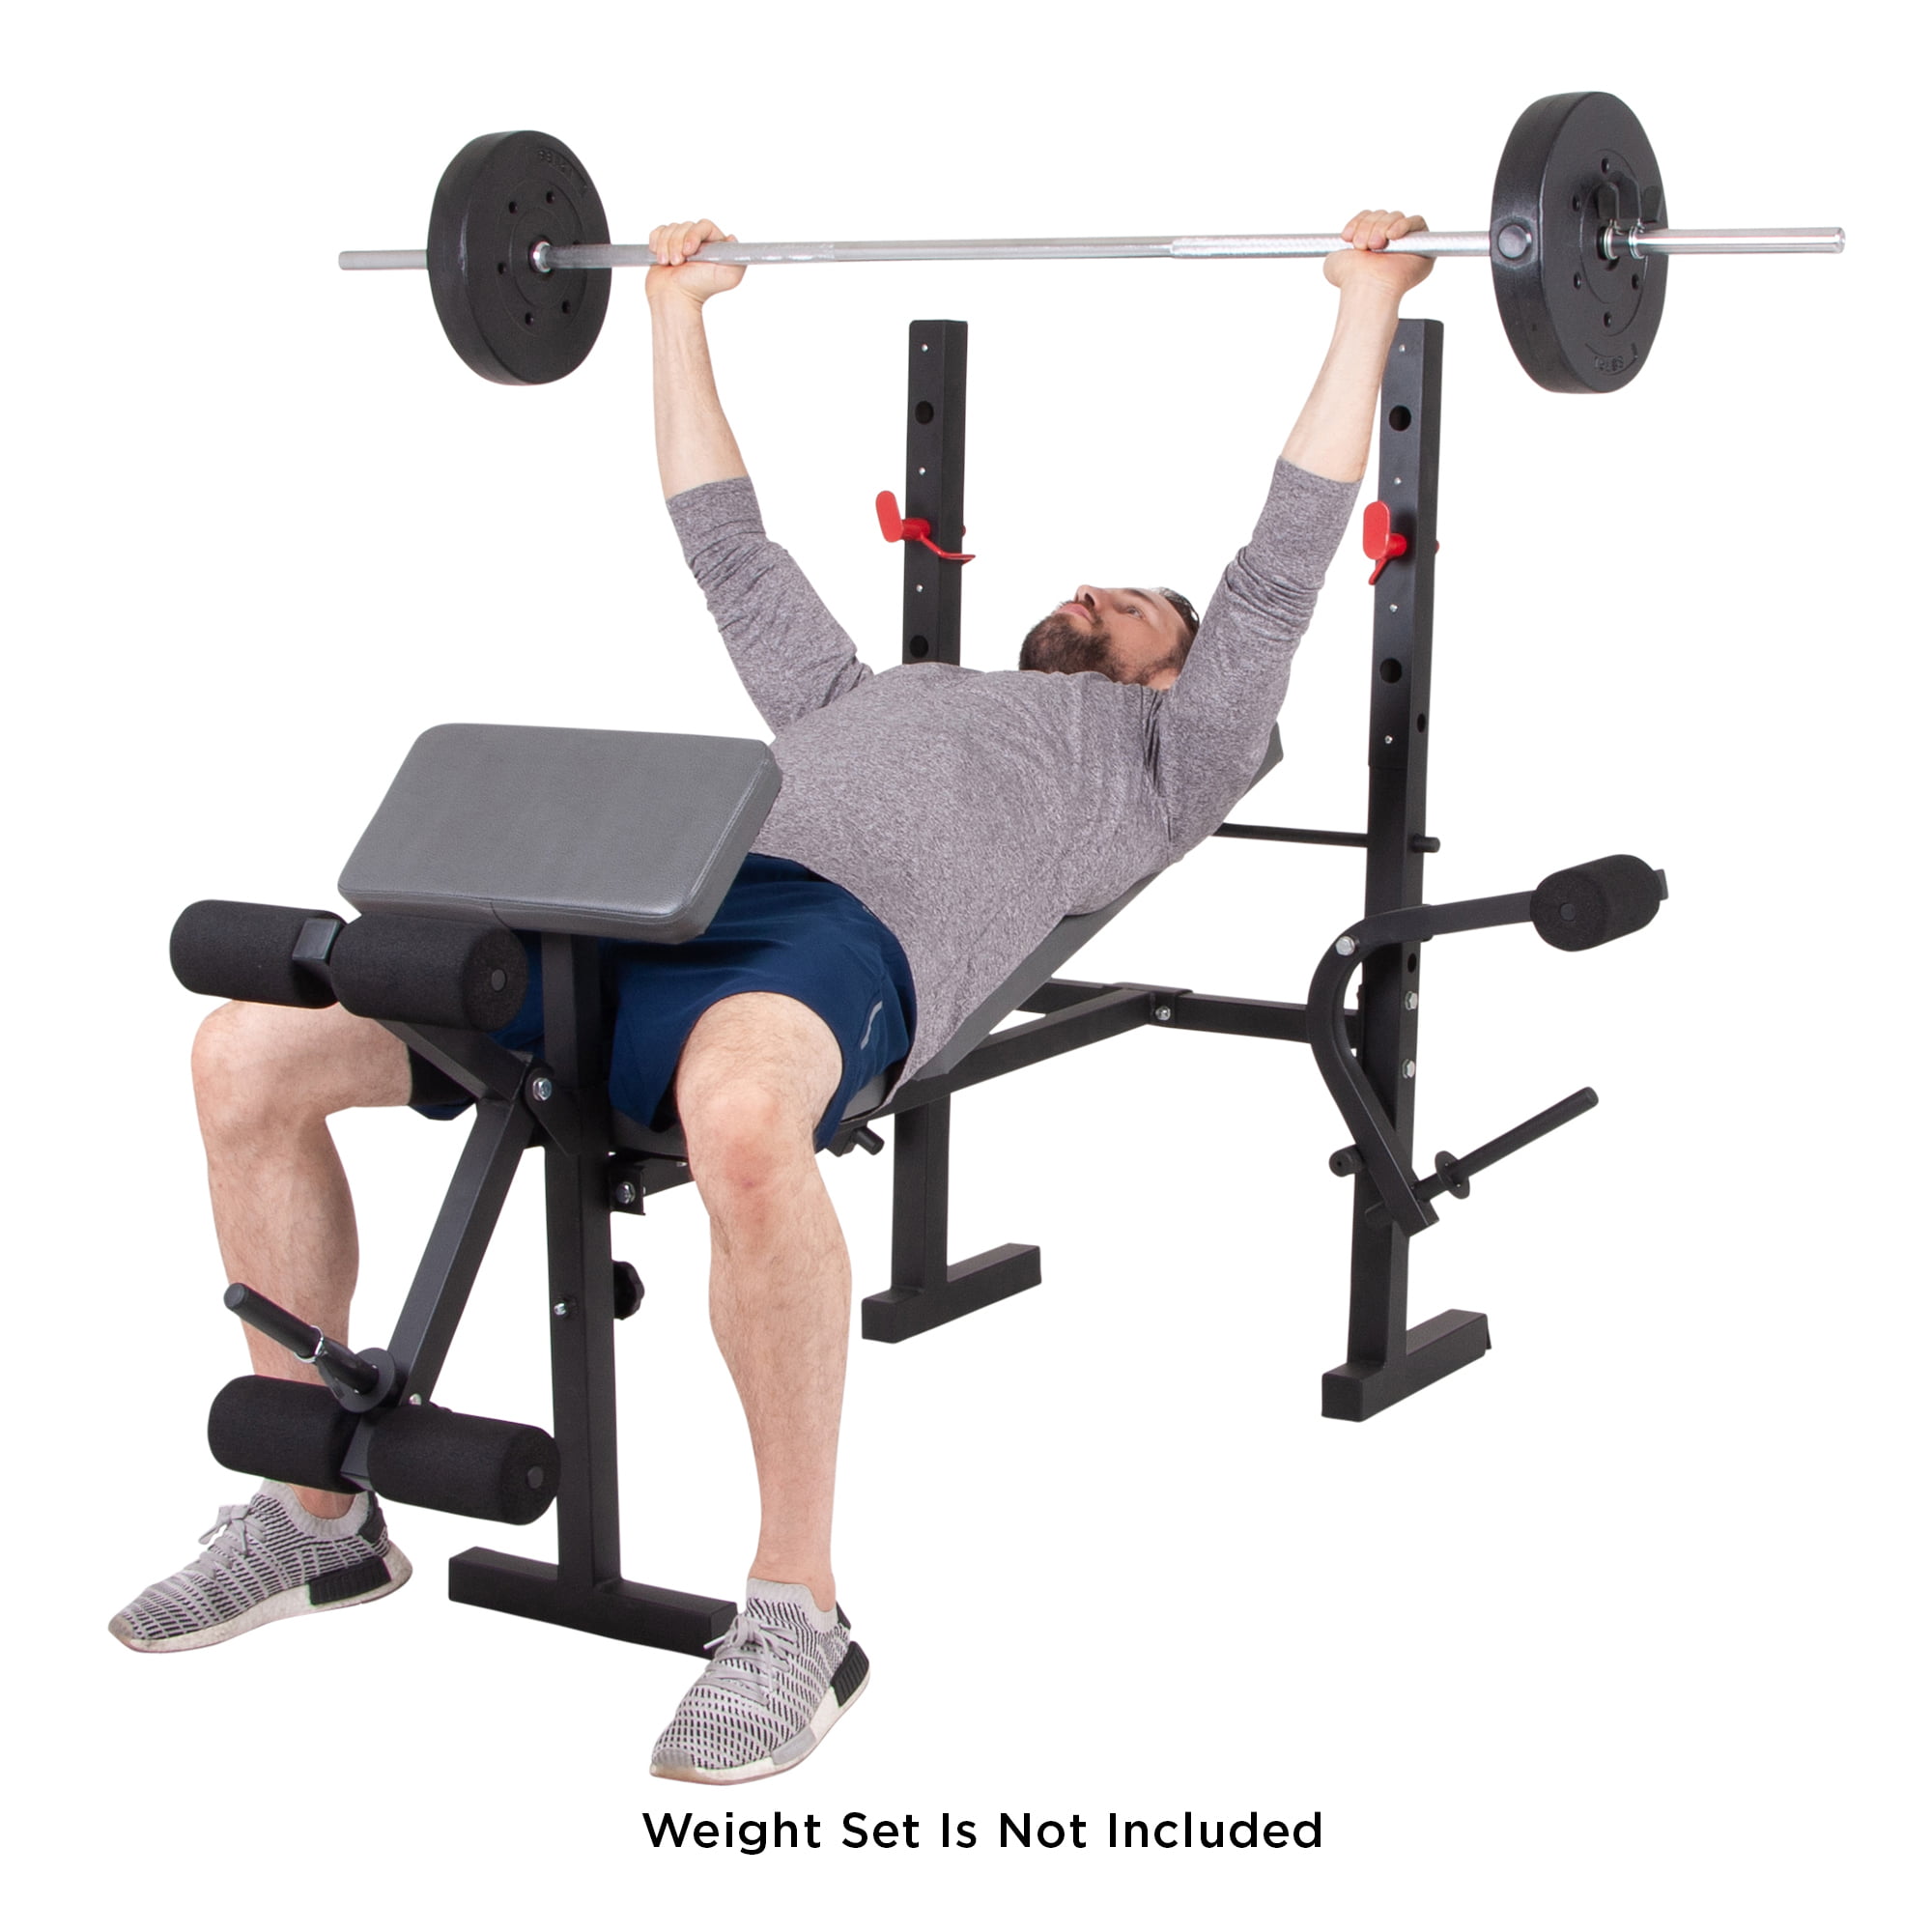 ADJUSTABLE LIFTING WEIGHT BENCH SET Press Workout GYM Home Exercise 